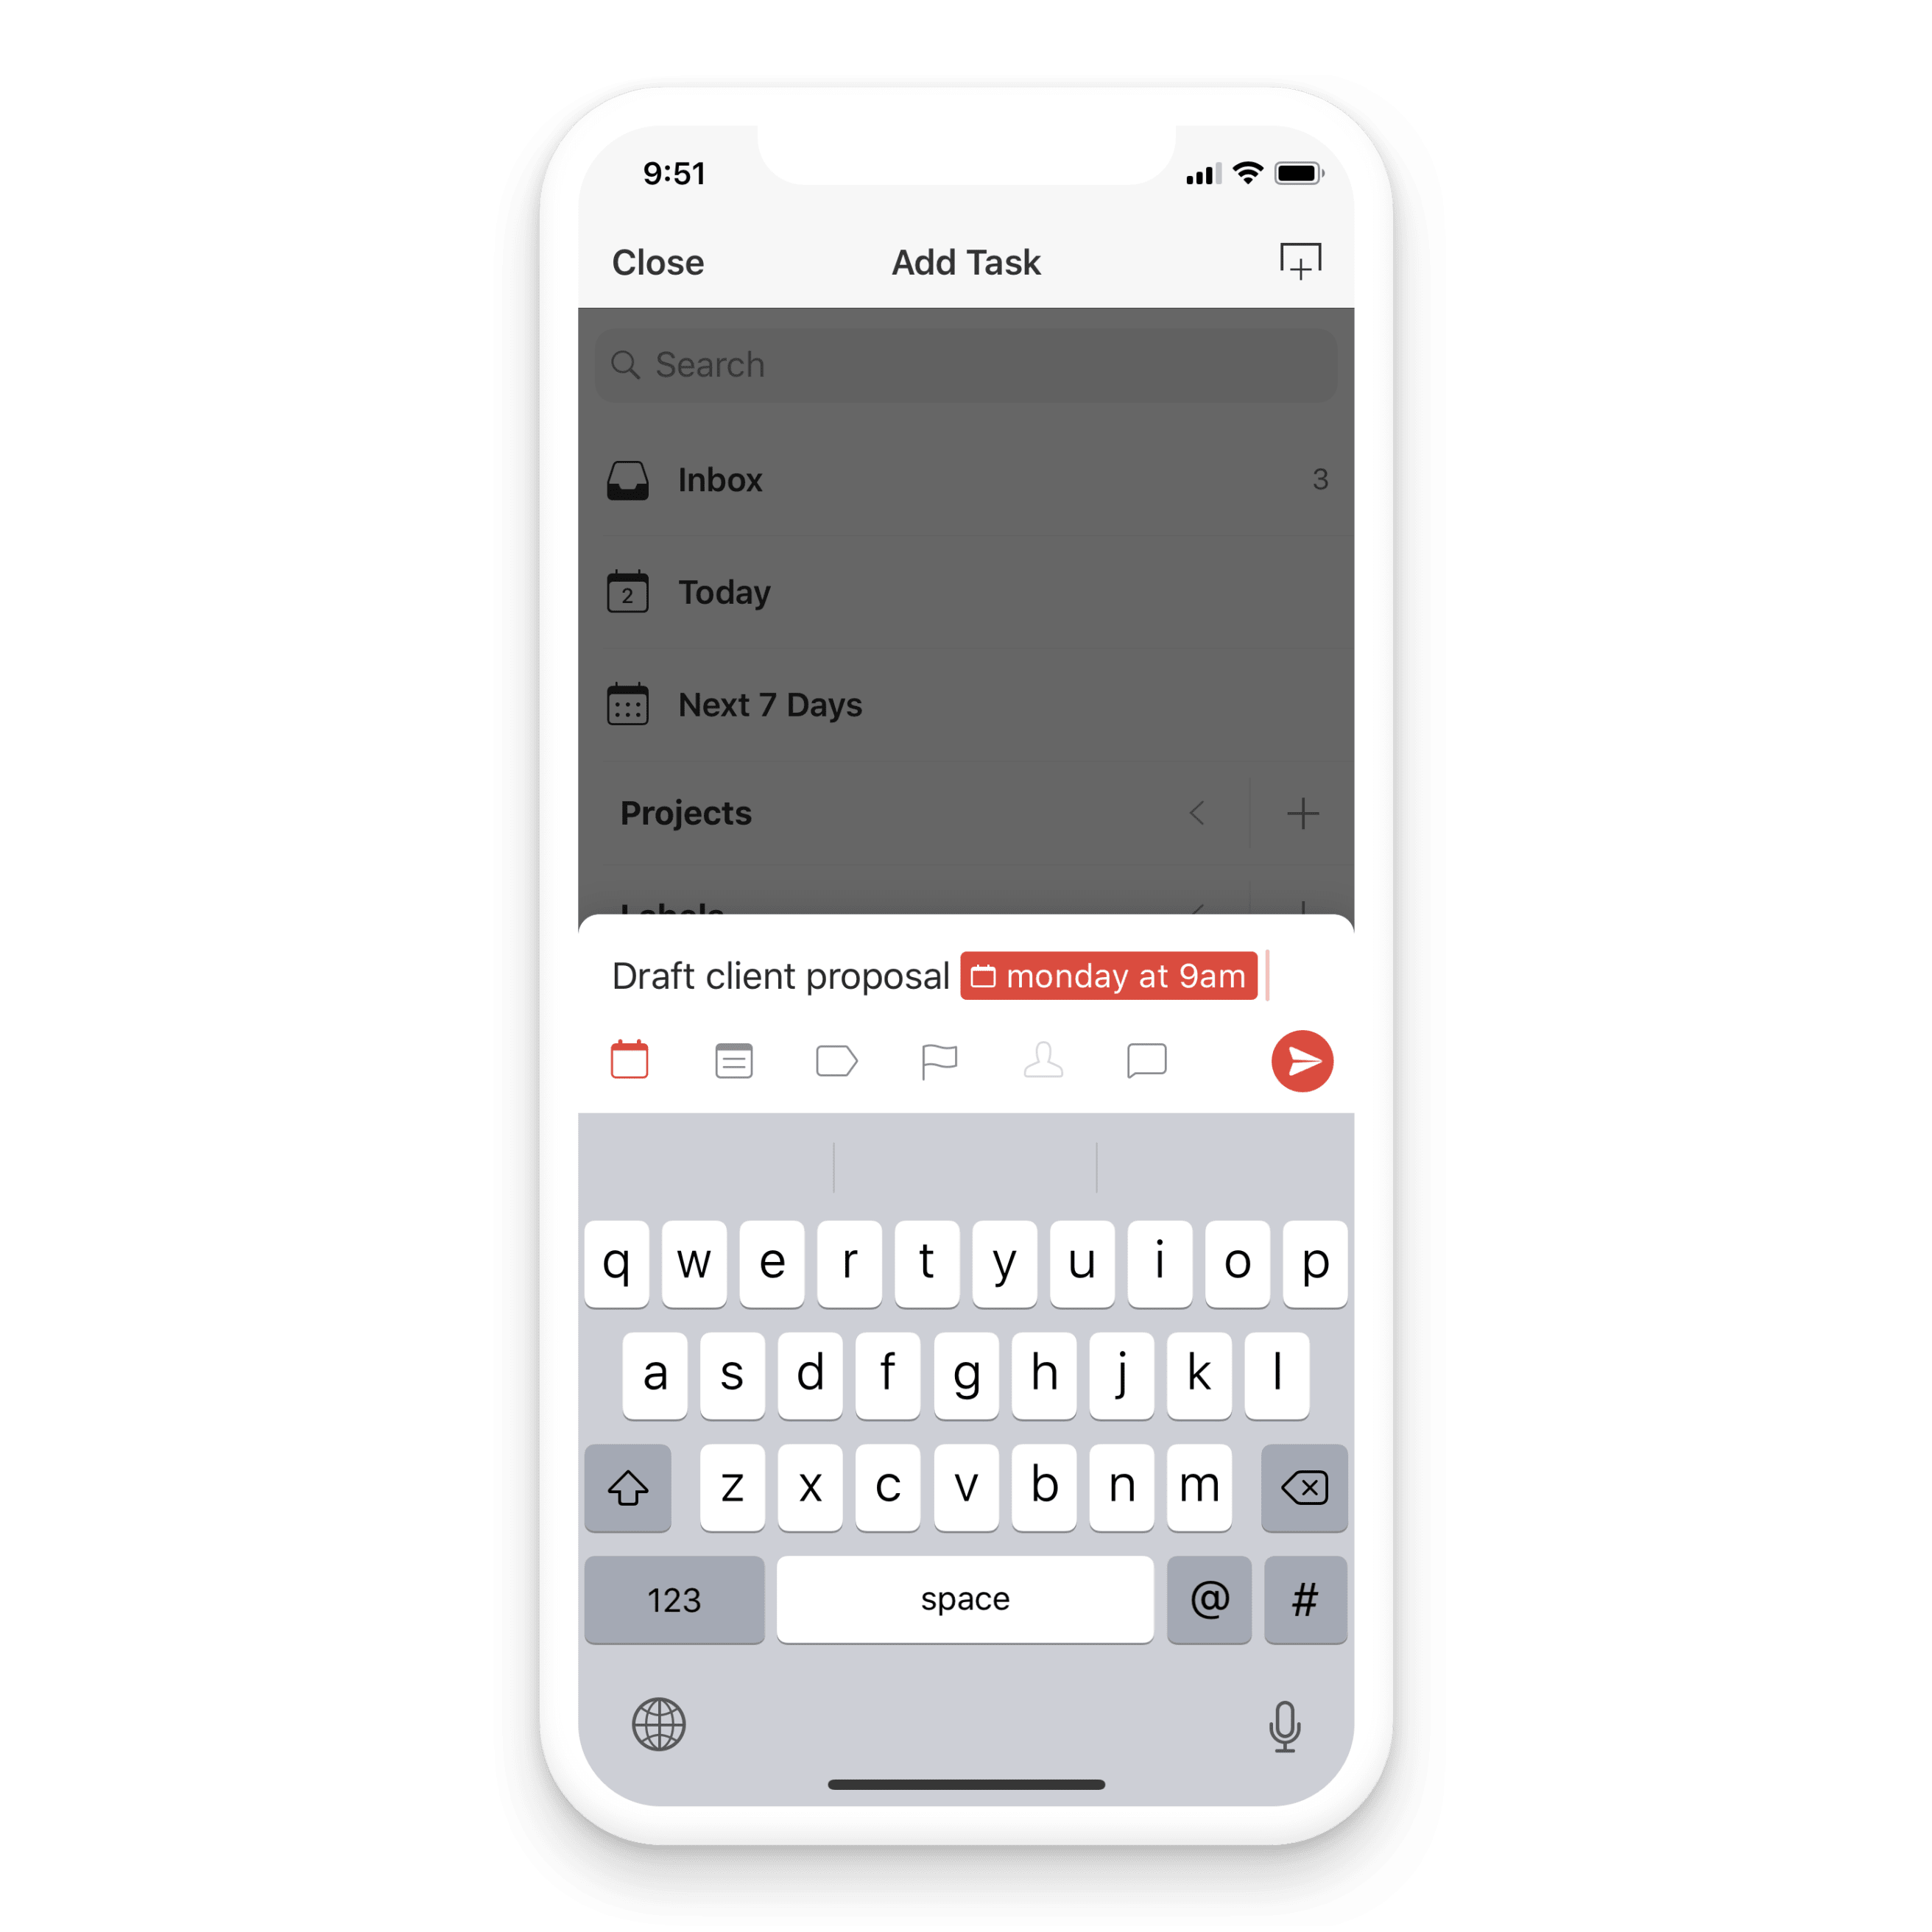 Smart date recognition feature from Todoist to quickly schedule tasks in mobile 